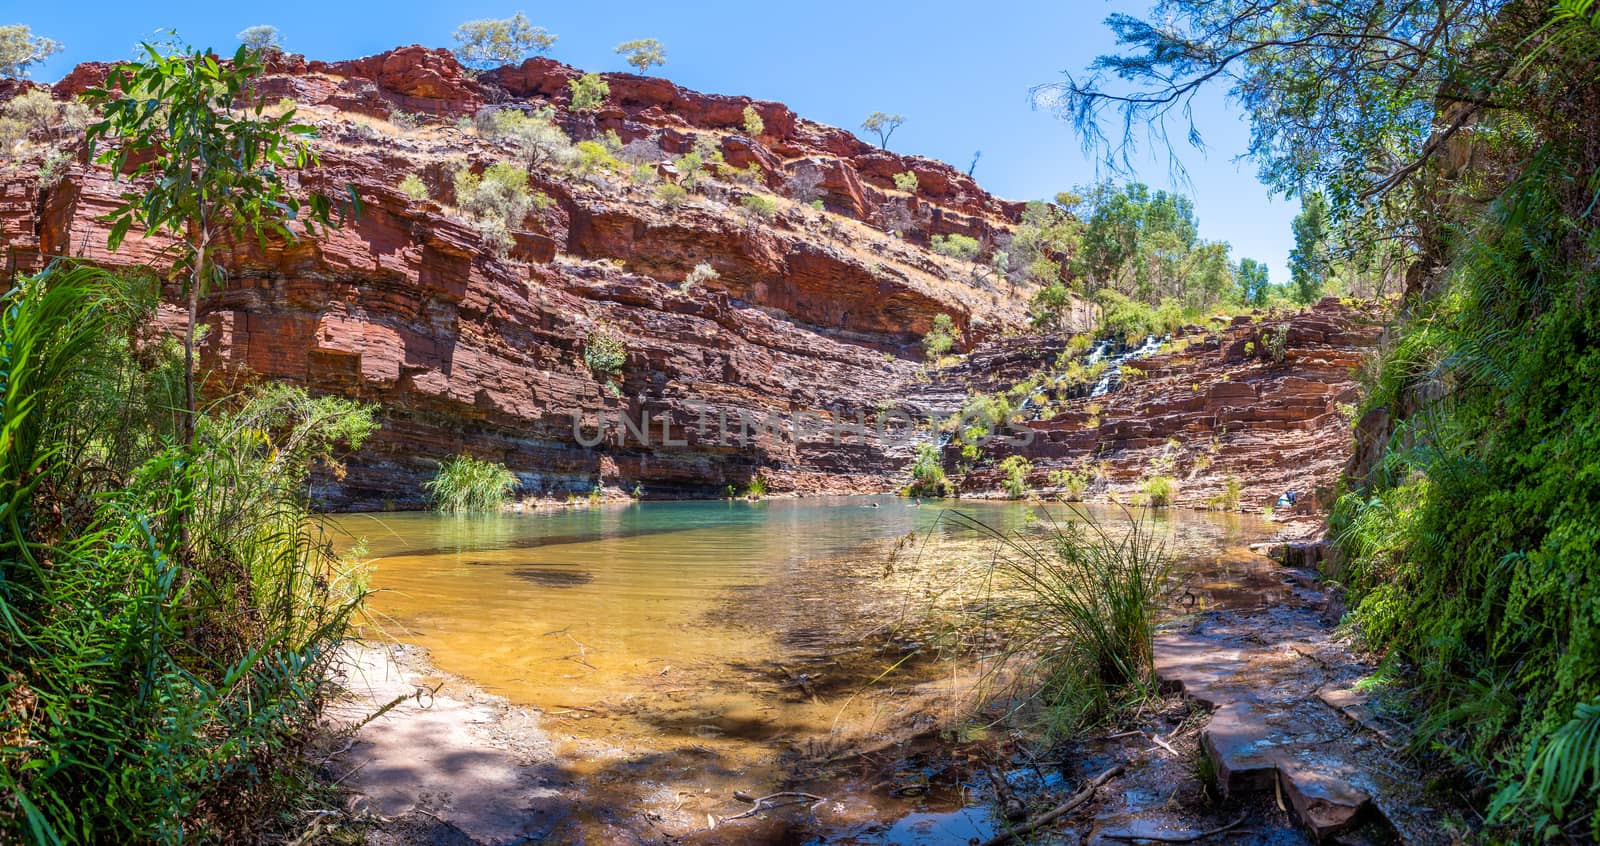 Panorama of Fortescue Falls and pool at the bottom of Dales Gorge at Karijini National Park Australia